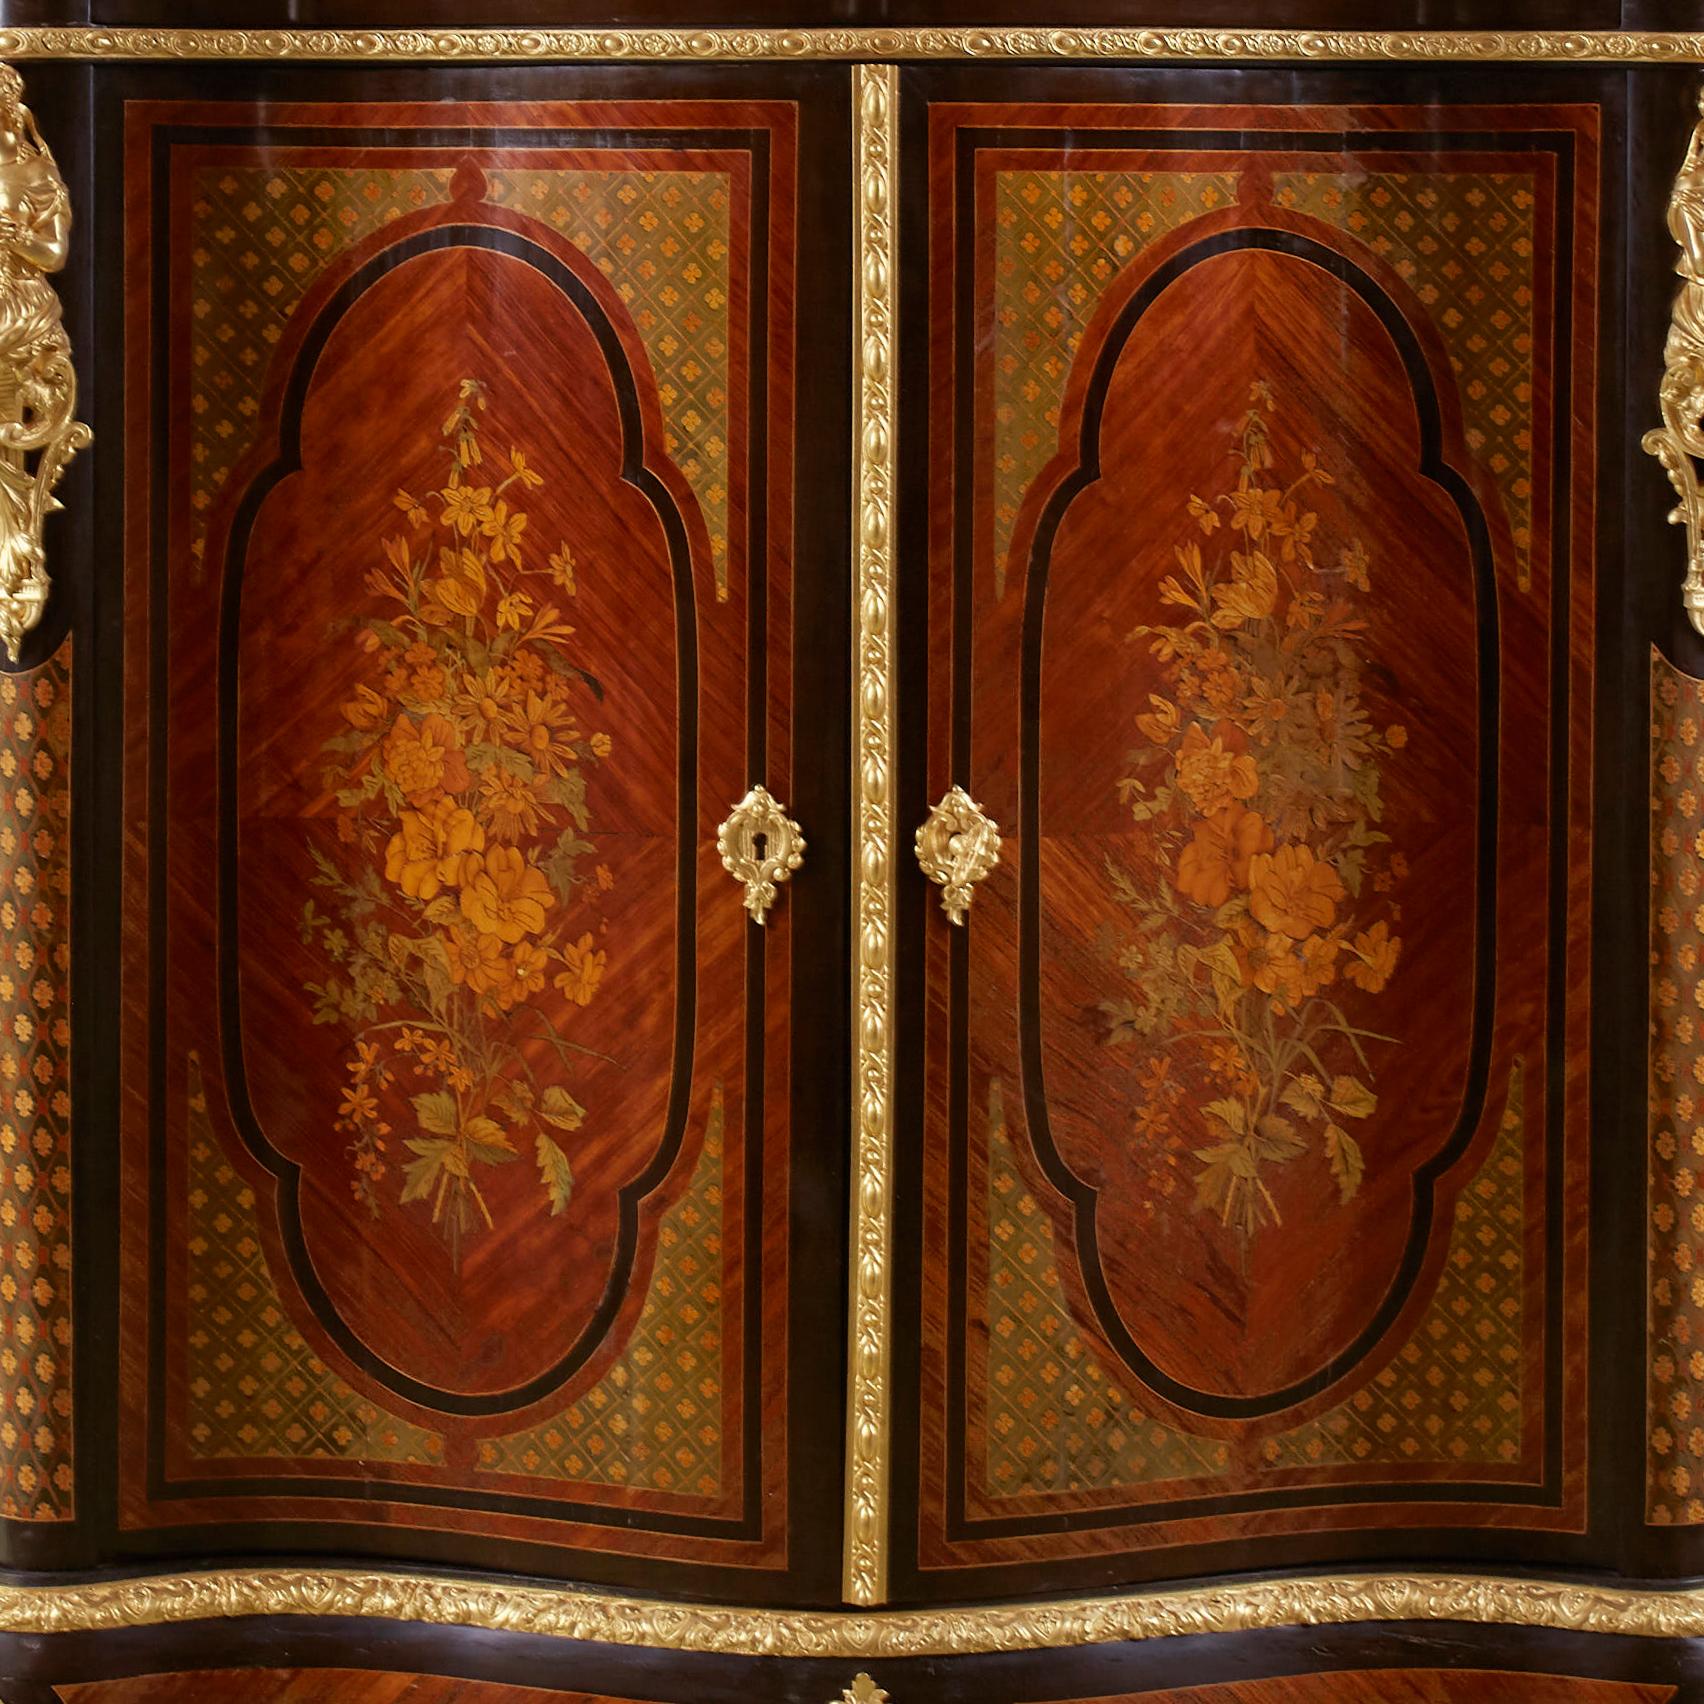 Alexander Roux Serpentine Inlaid Side Cabinet’ uses mainly light wood materials such as kingwood or satinwood, and floral motifs to bring a feeling of closeness, friendliness towards nature. The background texture has a classic trellis lattice